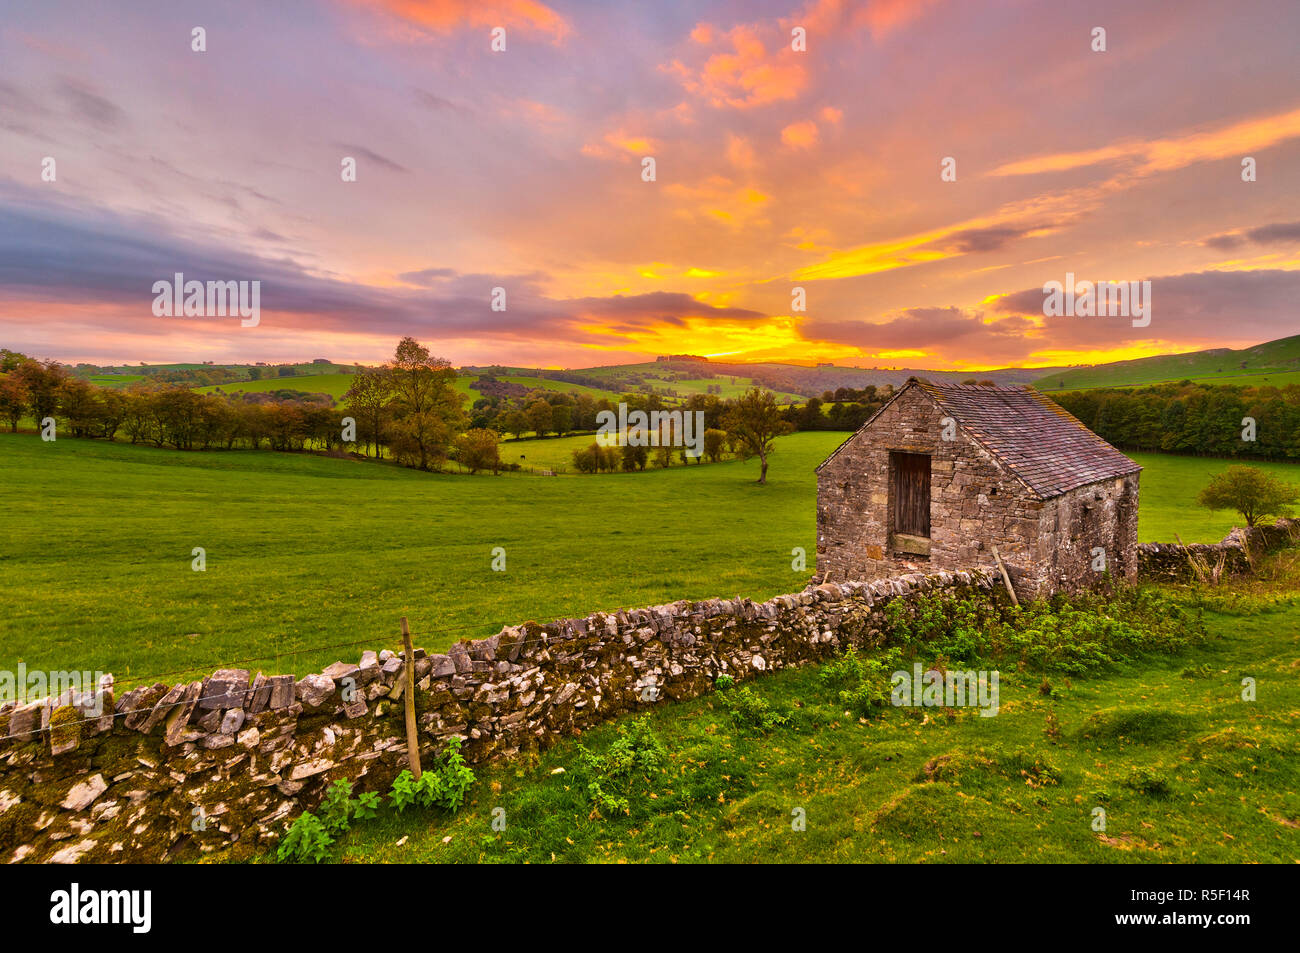 UK, England, Derbyshire, Peak District National Park, River Manifold Valley near Ilam,dry stone wall and barn Stock Photo